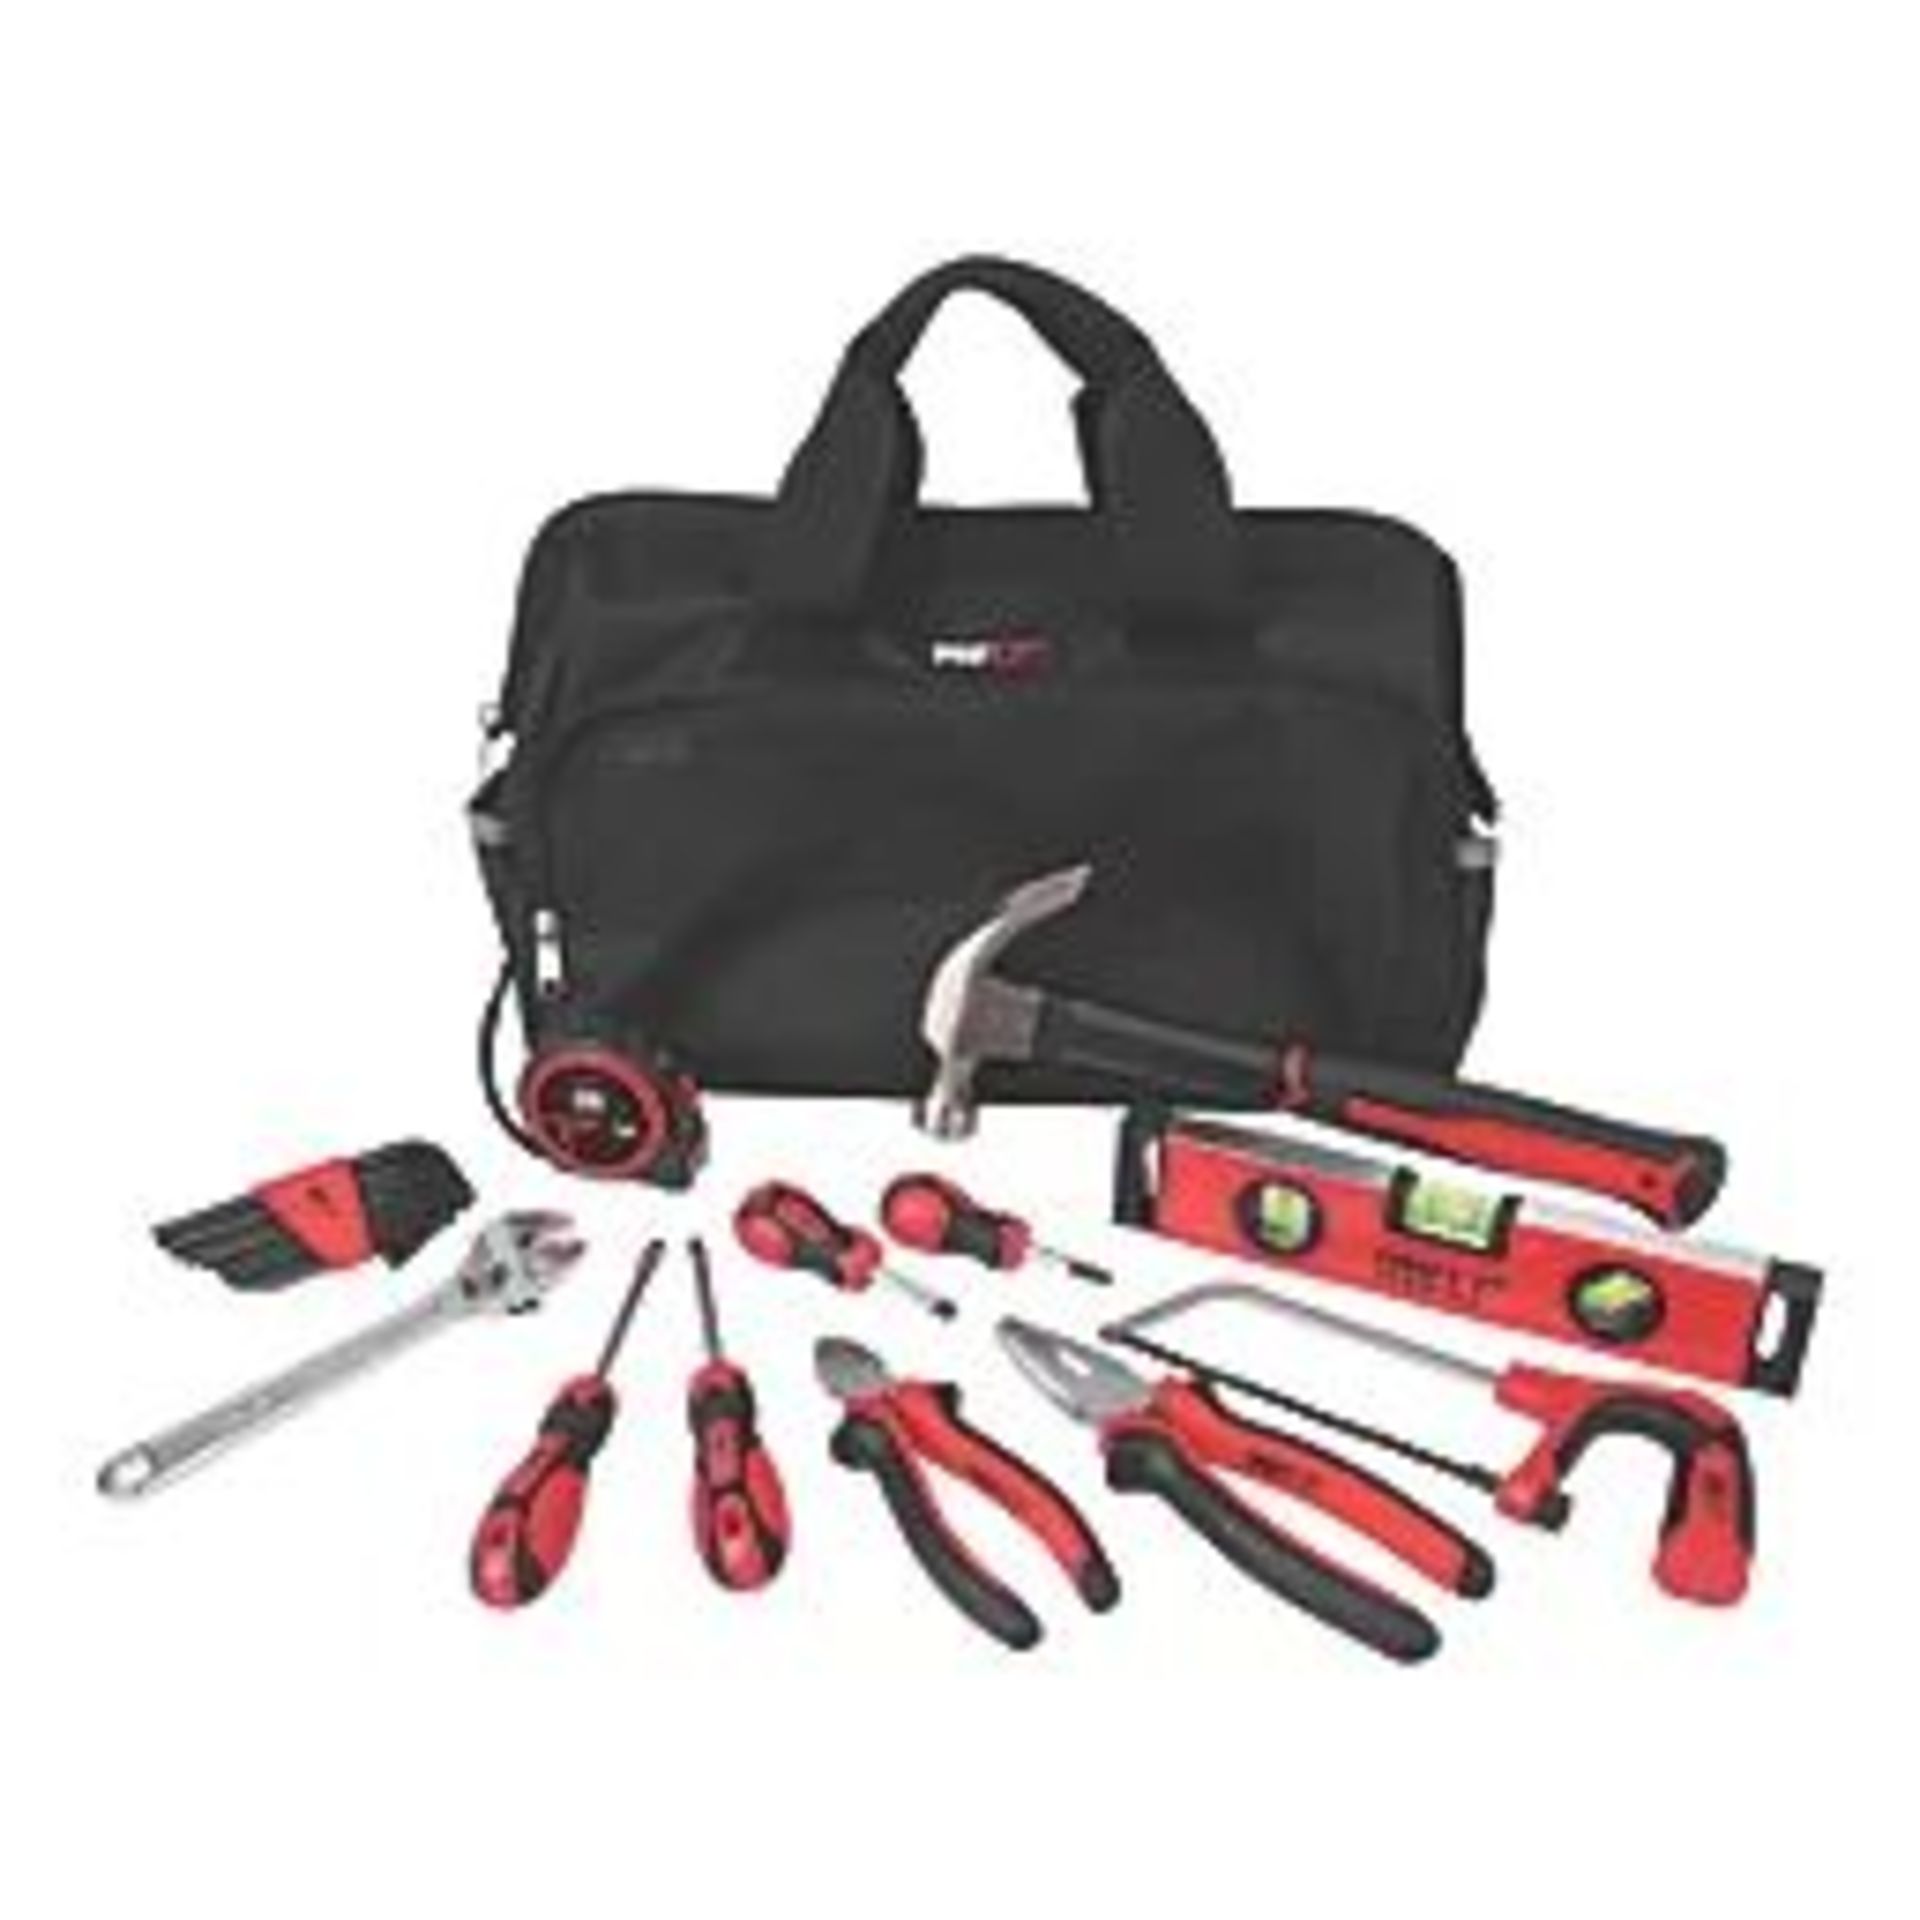 FORGE STEEL TOOL KIT 22 PIECE SET. - S2. A range of tools including hammer, level, hacksaw,